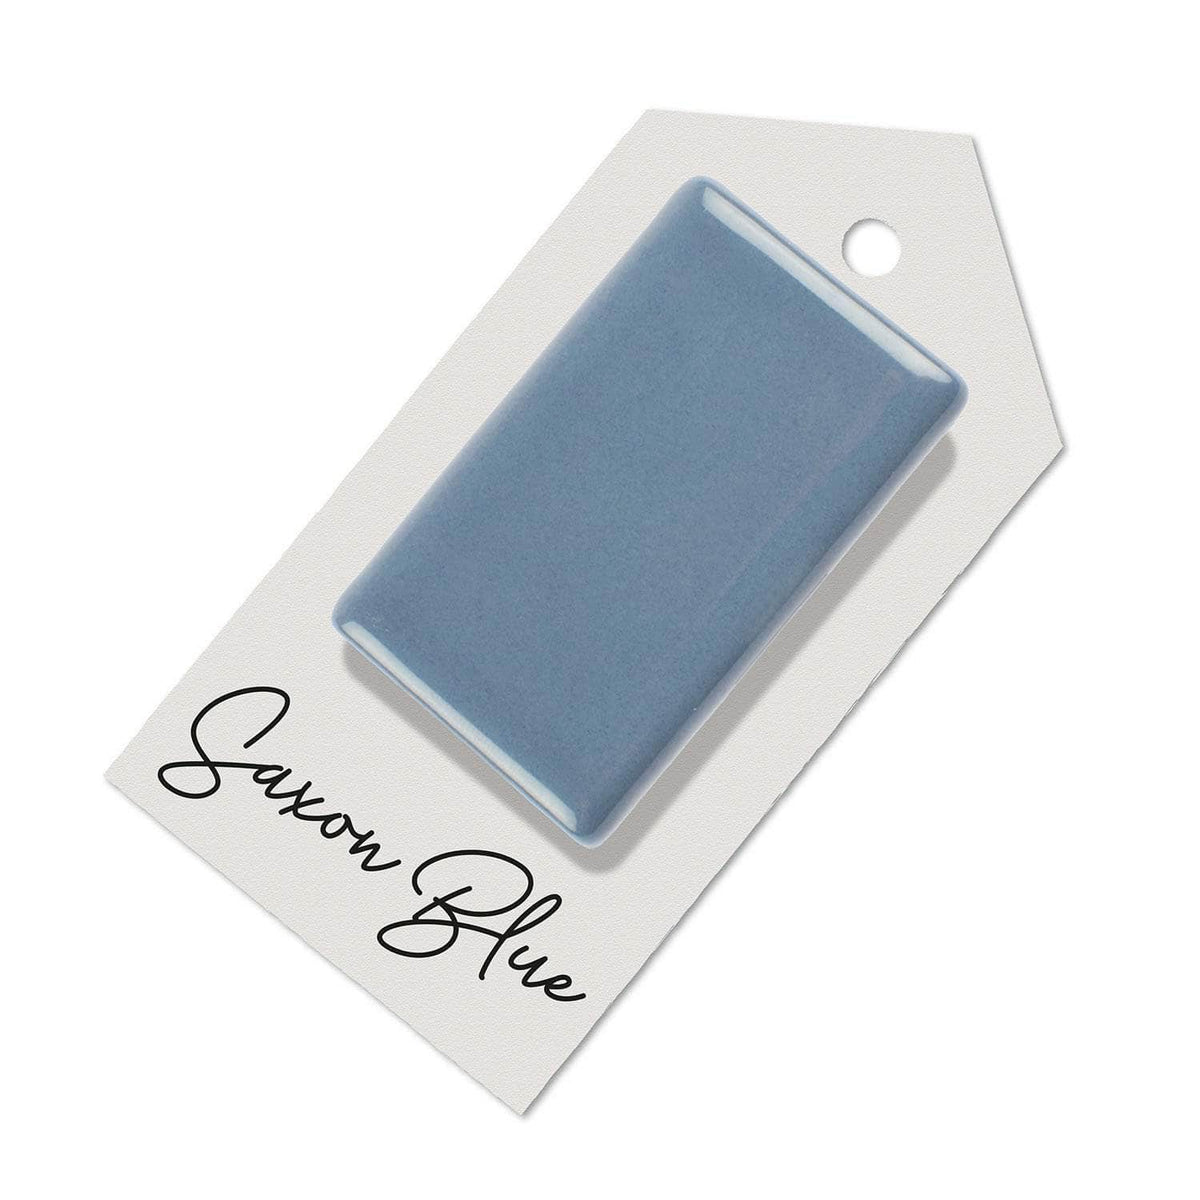 Saxon Blue sample for Aga range cooker re-enamelling &amp; reconditioned cookers